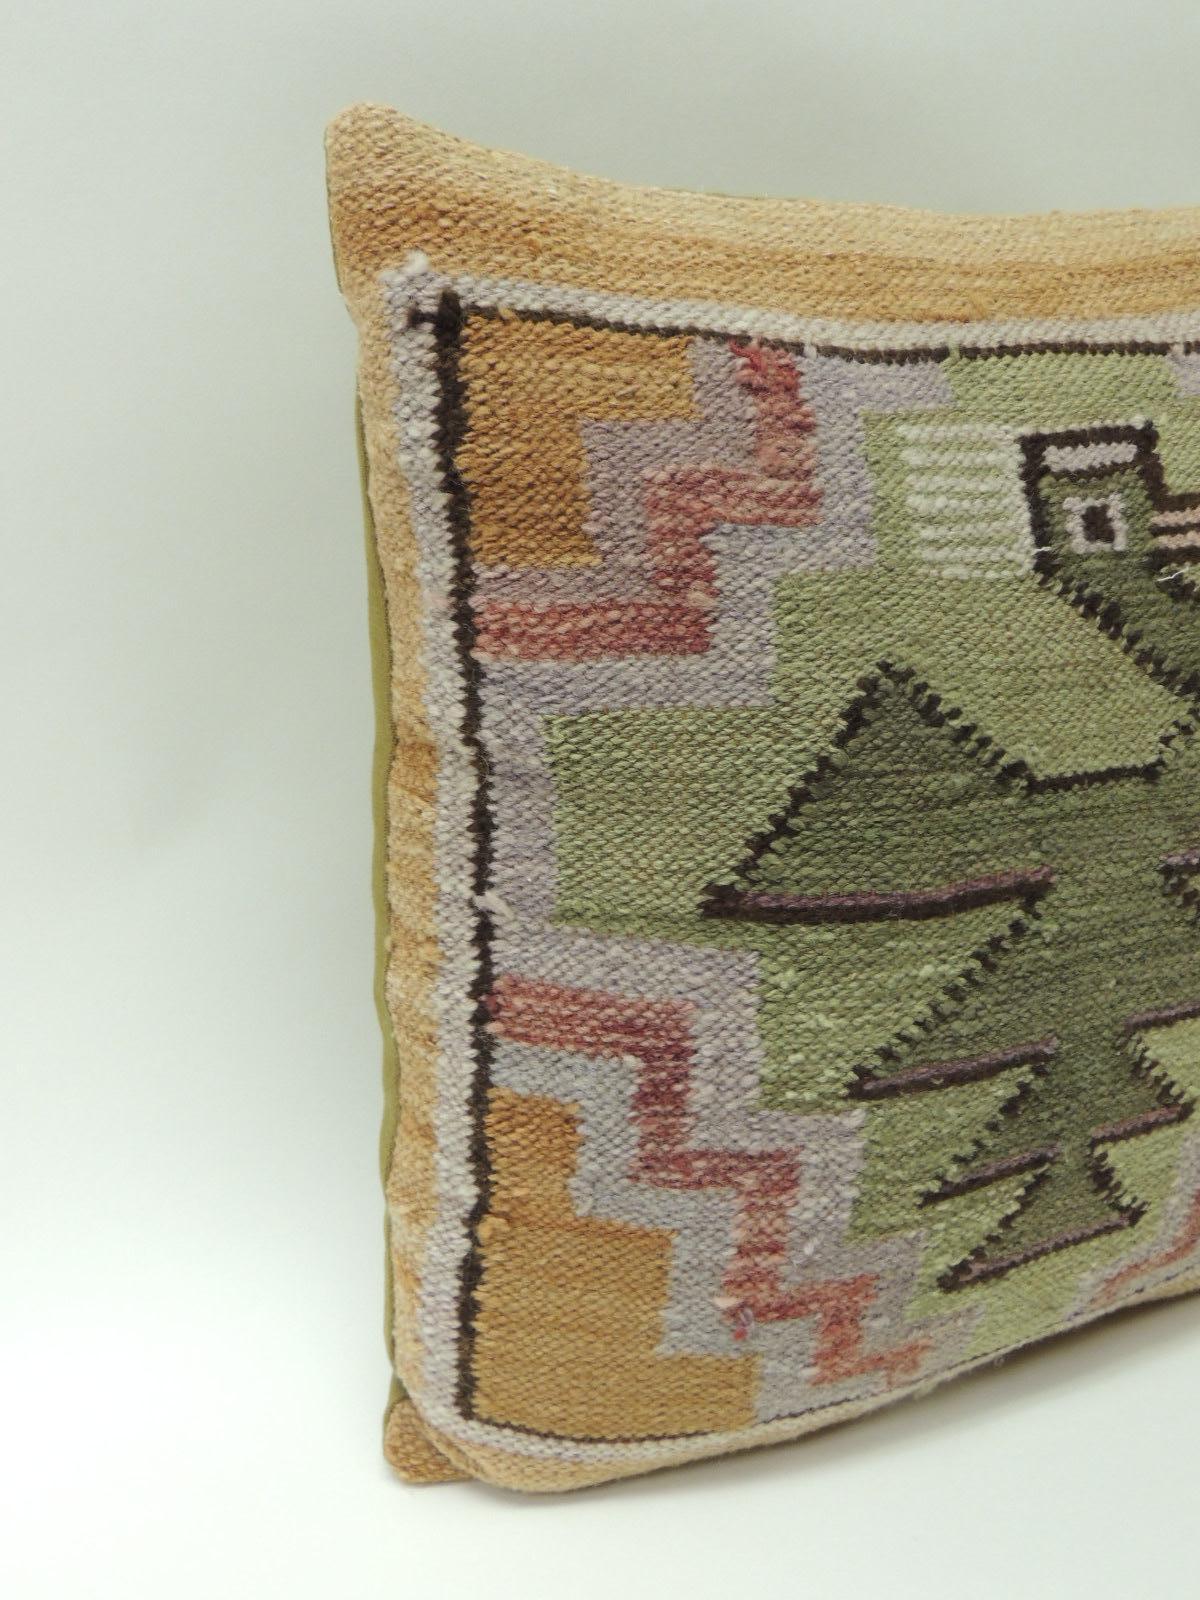 Peruvian woven tribal pillow, depicting birds and traditional tribal pattern.
In shades of green, brown, yellow, black, pink, orange and natural. Army green linen backing.
Throw pillow handcrafted and designed in the USA. Custom-made pillow